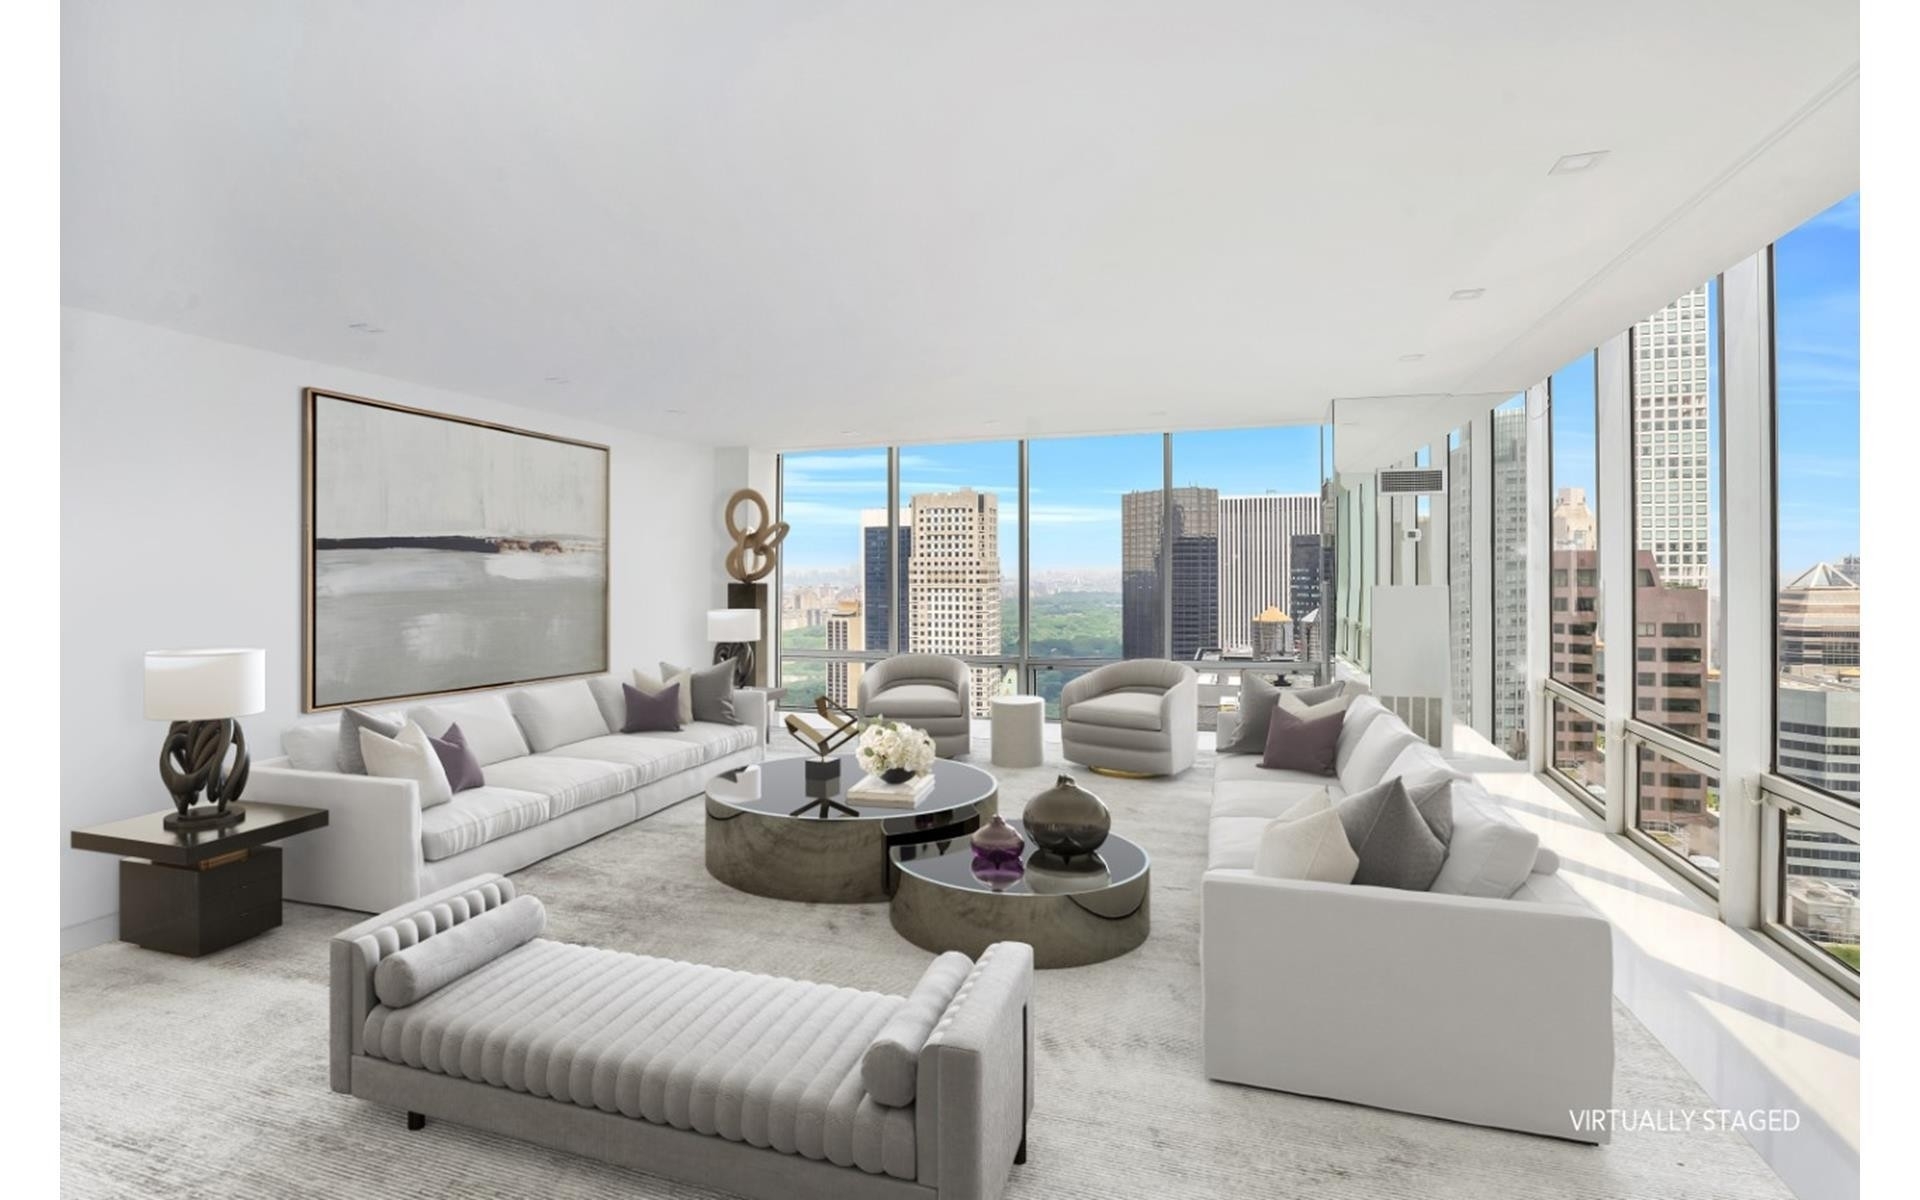 Property at Olympic Tower, 641 FIFTH AVE, 46/47C Turtle Bay, New York, NY 10022